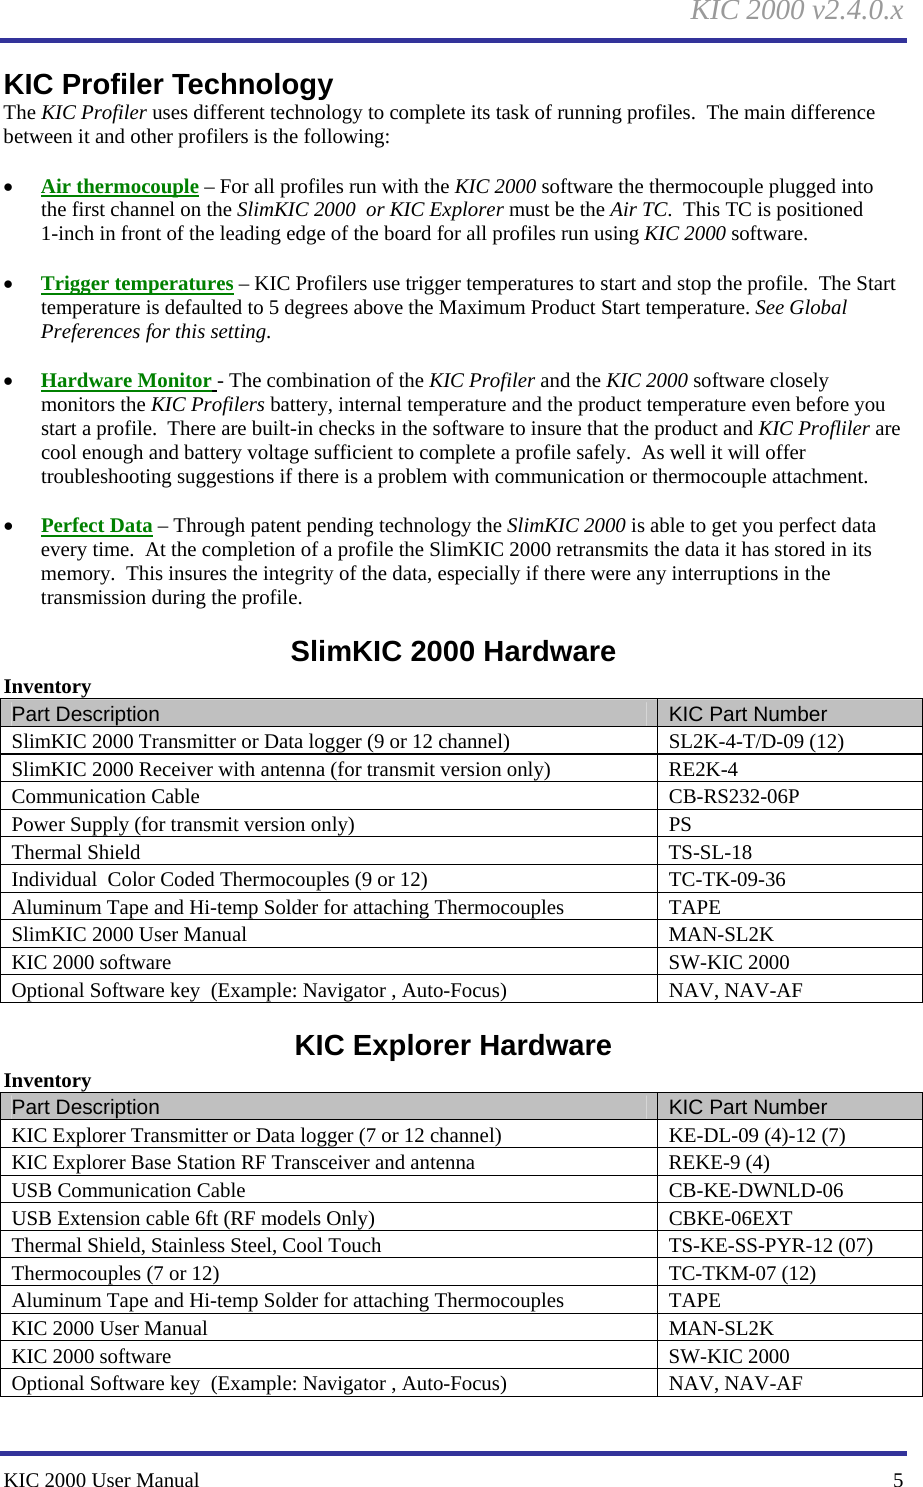 KIC 2000 v2.4.0.x KIC 2000 User Manual    5 KIC Profiler Technology The KIC Profiler uses different technology to complete its task of running profiles.  The main difference between it and other profilers is the following:  • Air thermocouple – For all profiles run with the KIC 2000 software the thermocouple plugged into the first channel on the SlimKIC 2000  or KIC Explorer must be the Air TC.  This TC is positioned 1-inch in front of the leading edge of the board for all profiles run using KIC 2000 software.  • Trigger temperatures – KIC Profilers use trigger temperatures to start and stop the profile.  The Start temperature is defaulted to 5 degrees above the Maximum Product Start temperature. See Global Preferences for this setting.  • Hardware Monitor - The combination of the KIC Profiler and the KIC 2000 software closely monitors the KIC Profilers battery, internal temperature and the product temperature even before you start a profile.  There are built-in checks in the software to insure that the product and KIC Profliler are cool enough and battery voltage sufficient to complete a profile safely.  As well it will offer troubleshooting suggestions if there is a problem with communication or thermocouple attachment.  • Perfect Data – Through patent pending technology the SlimKIC 2000 is able to get you perfect data every time.  At the completion of a profile the SlimKIC 2000 retransmits the data it has stored in its memory.  This insures the integrity of the data, especially if there were any interruptions in the transmission during the profile. SlimKIC 2000 Hardware Inventory Part Description  KIC Part Number SlimKIC 2000 Transmitter or Data logger (9 or 12 channel)  SL2K-4-T/D-09 (12) SlimKIC 2000 Receiver with antenna (for transmit version only)  RE2K-4 Communication Cable  CB-RS232-06P Power Supply (for transmit version only)  PS Thermal Shield  TS-SL-18 Individual  Color Coded Thermocouples (9 or 12)  TC-TK-09-36 Aluminum Tape and Hi-temp Solder for attaching Thermocouples  TAPE SlimKIC 2000 User Manual  MAN-SL2K KIC 2000 software   SW-KIC 2000 Optional Software key  (Example: Navigator , Auto-Focus)  NAV, NAV-AF KIC Explorer Hardware Inventory Part Description  KIC Part Number KIC Explorer Transmitter or Data logger (7 or 12 channel)  KE-DL-09 (4)-12 (7) KIC Explorer Base Station RF Transceiver and antenna  REKE-9 (4) USB Communication Cable  CB-KE-DWNLD-06 USB Extension cable 6ft (RF models Only)  CBKE-06EXT Thermal Shield, Stainless Steel, Cool Touch  TS-KE-SS-PYR-12 (07) Thermocouples (7 or 12)  TC-TKM-07 (12) Aluminum Tape and Hi-temp Solder for attaching Thermocouples  TAPE KIC 2000 User Manual  MAN-SL2K KIC 2000 software   SW-KIC 2000 Optional Software key  (Example: Navigator , Auto-Focus)  NAV, NAV-AF 